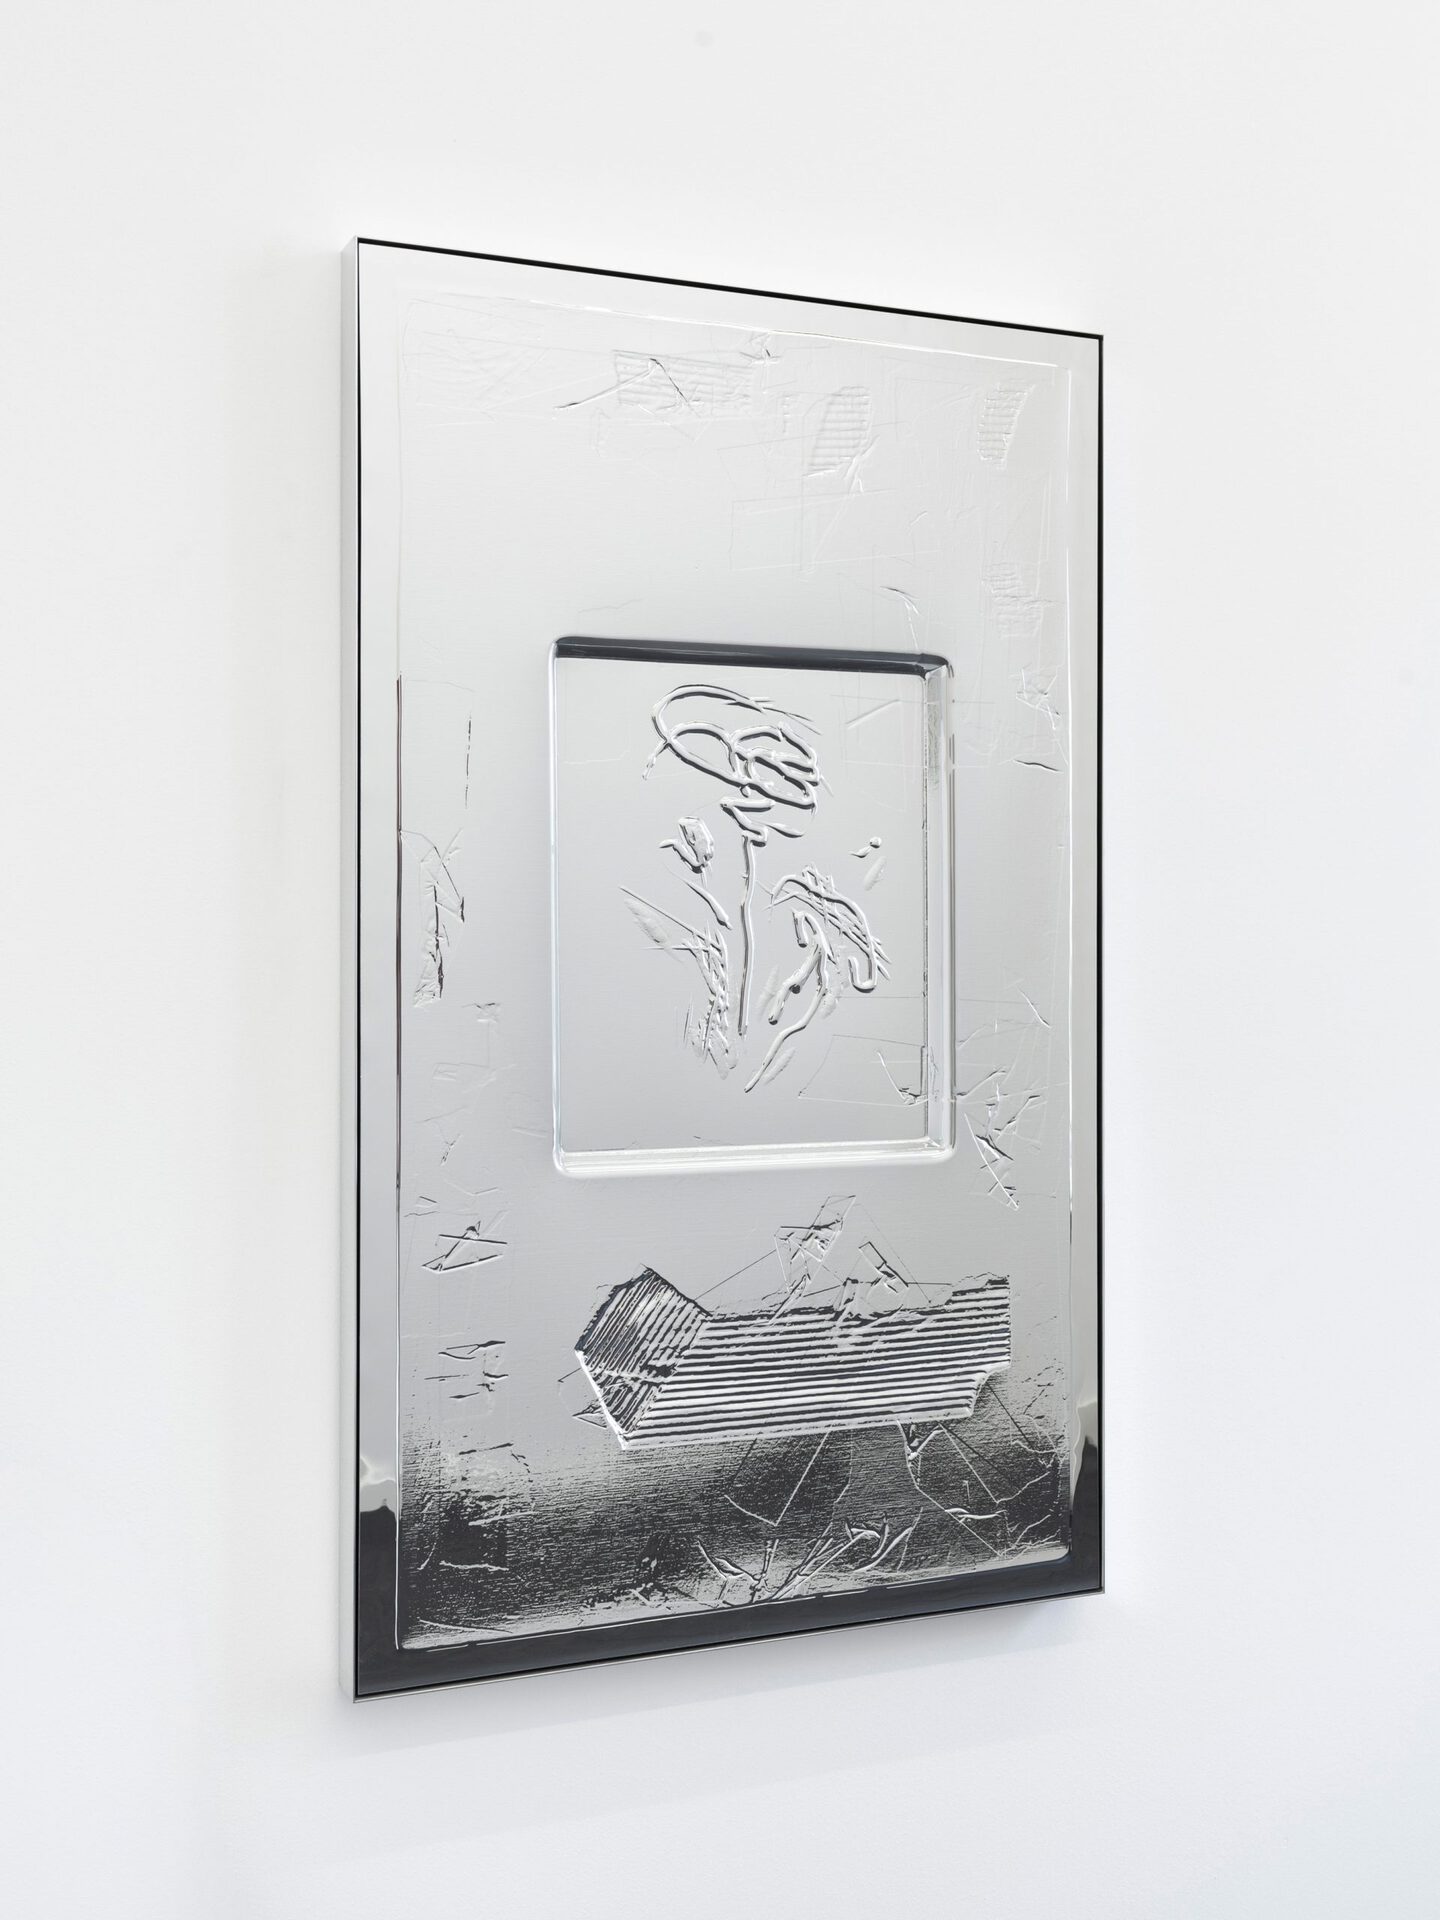 Hannah Sophie Dunkelberg, ARCADIAN 1168, 2022, polysterne, polished aluminium frame, 100 x 60 x 4 cm. Courtesy of the artist and Gunia Nowik Gallery.